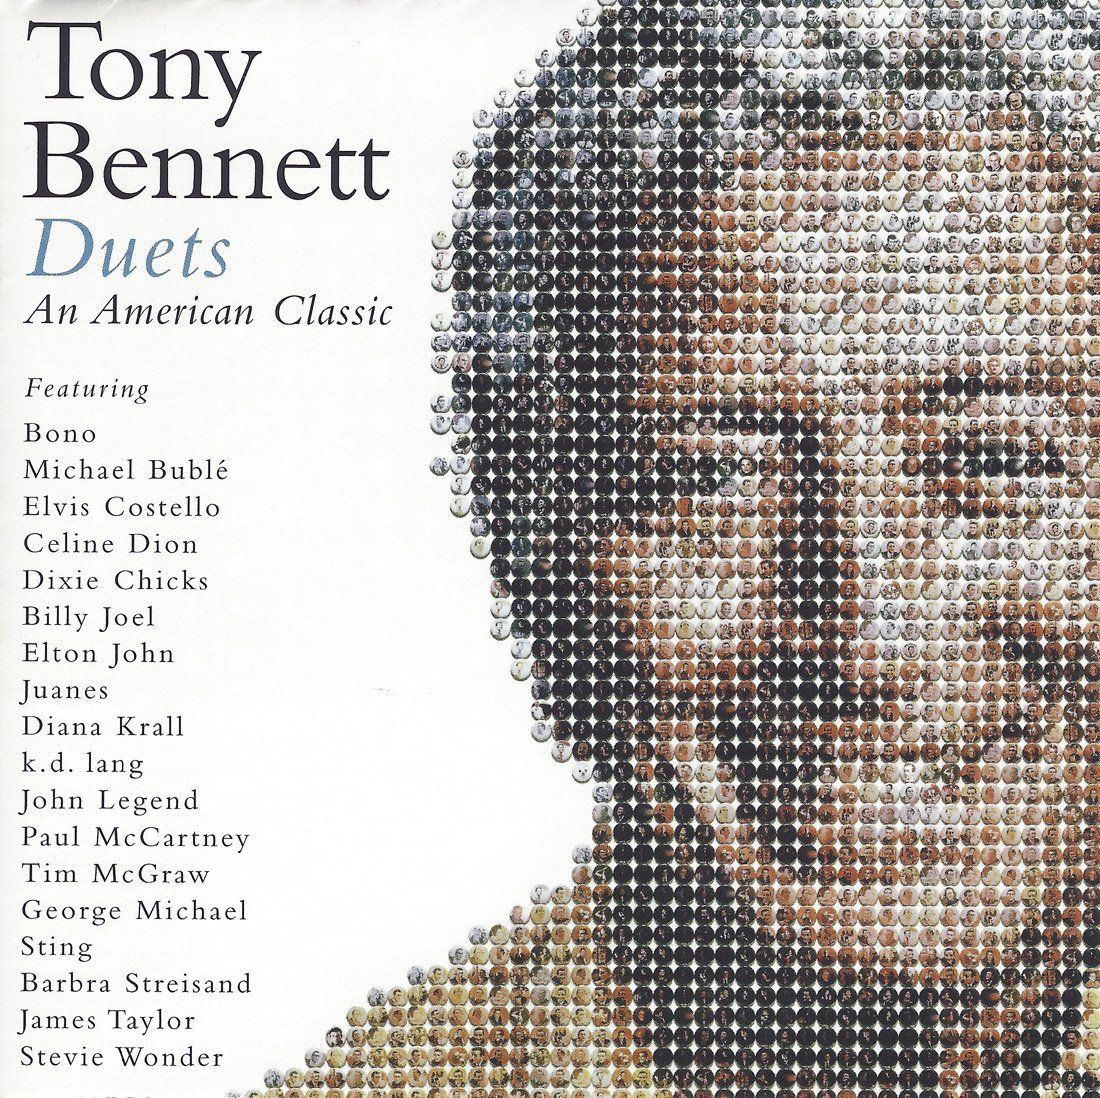 Front cover of Tony Bennett Duets CD